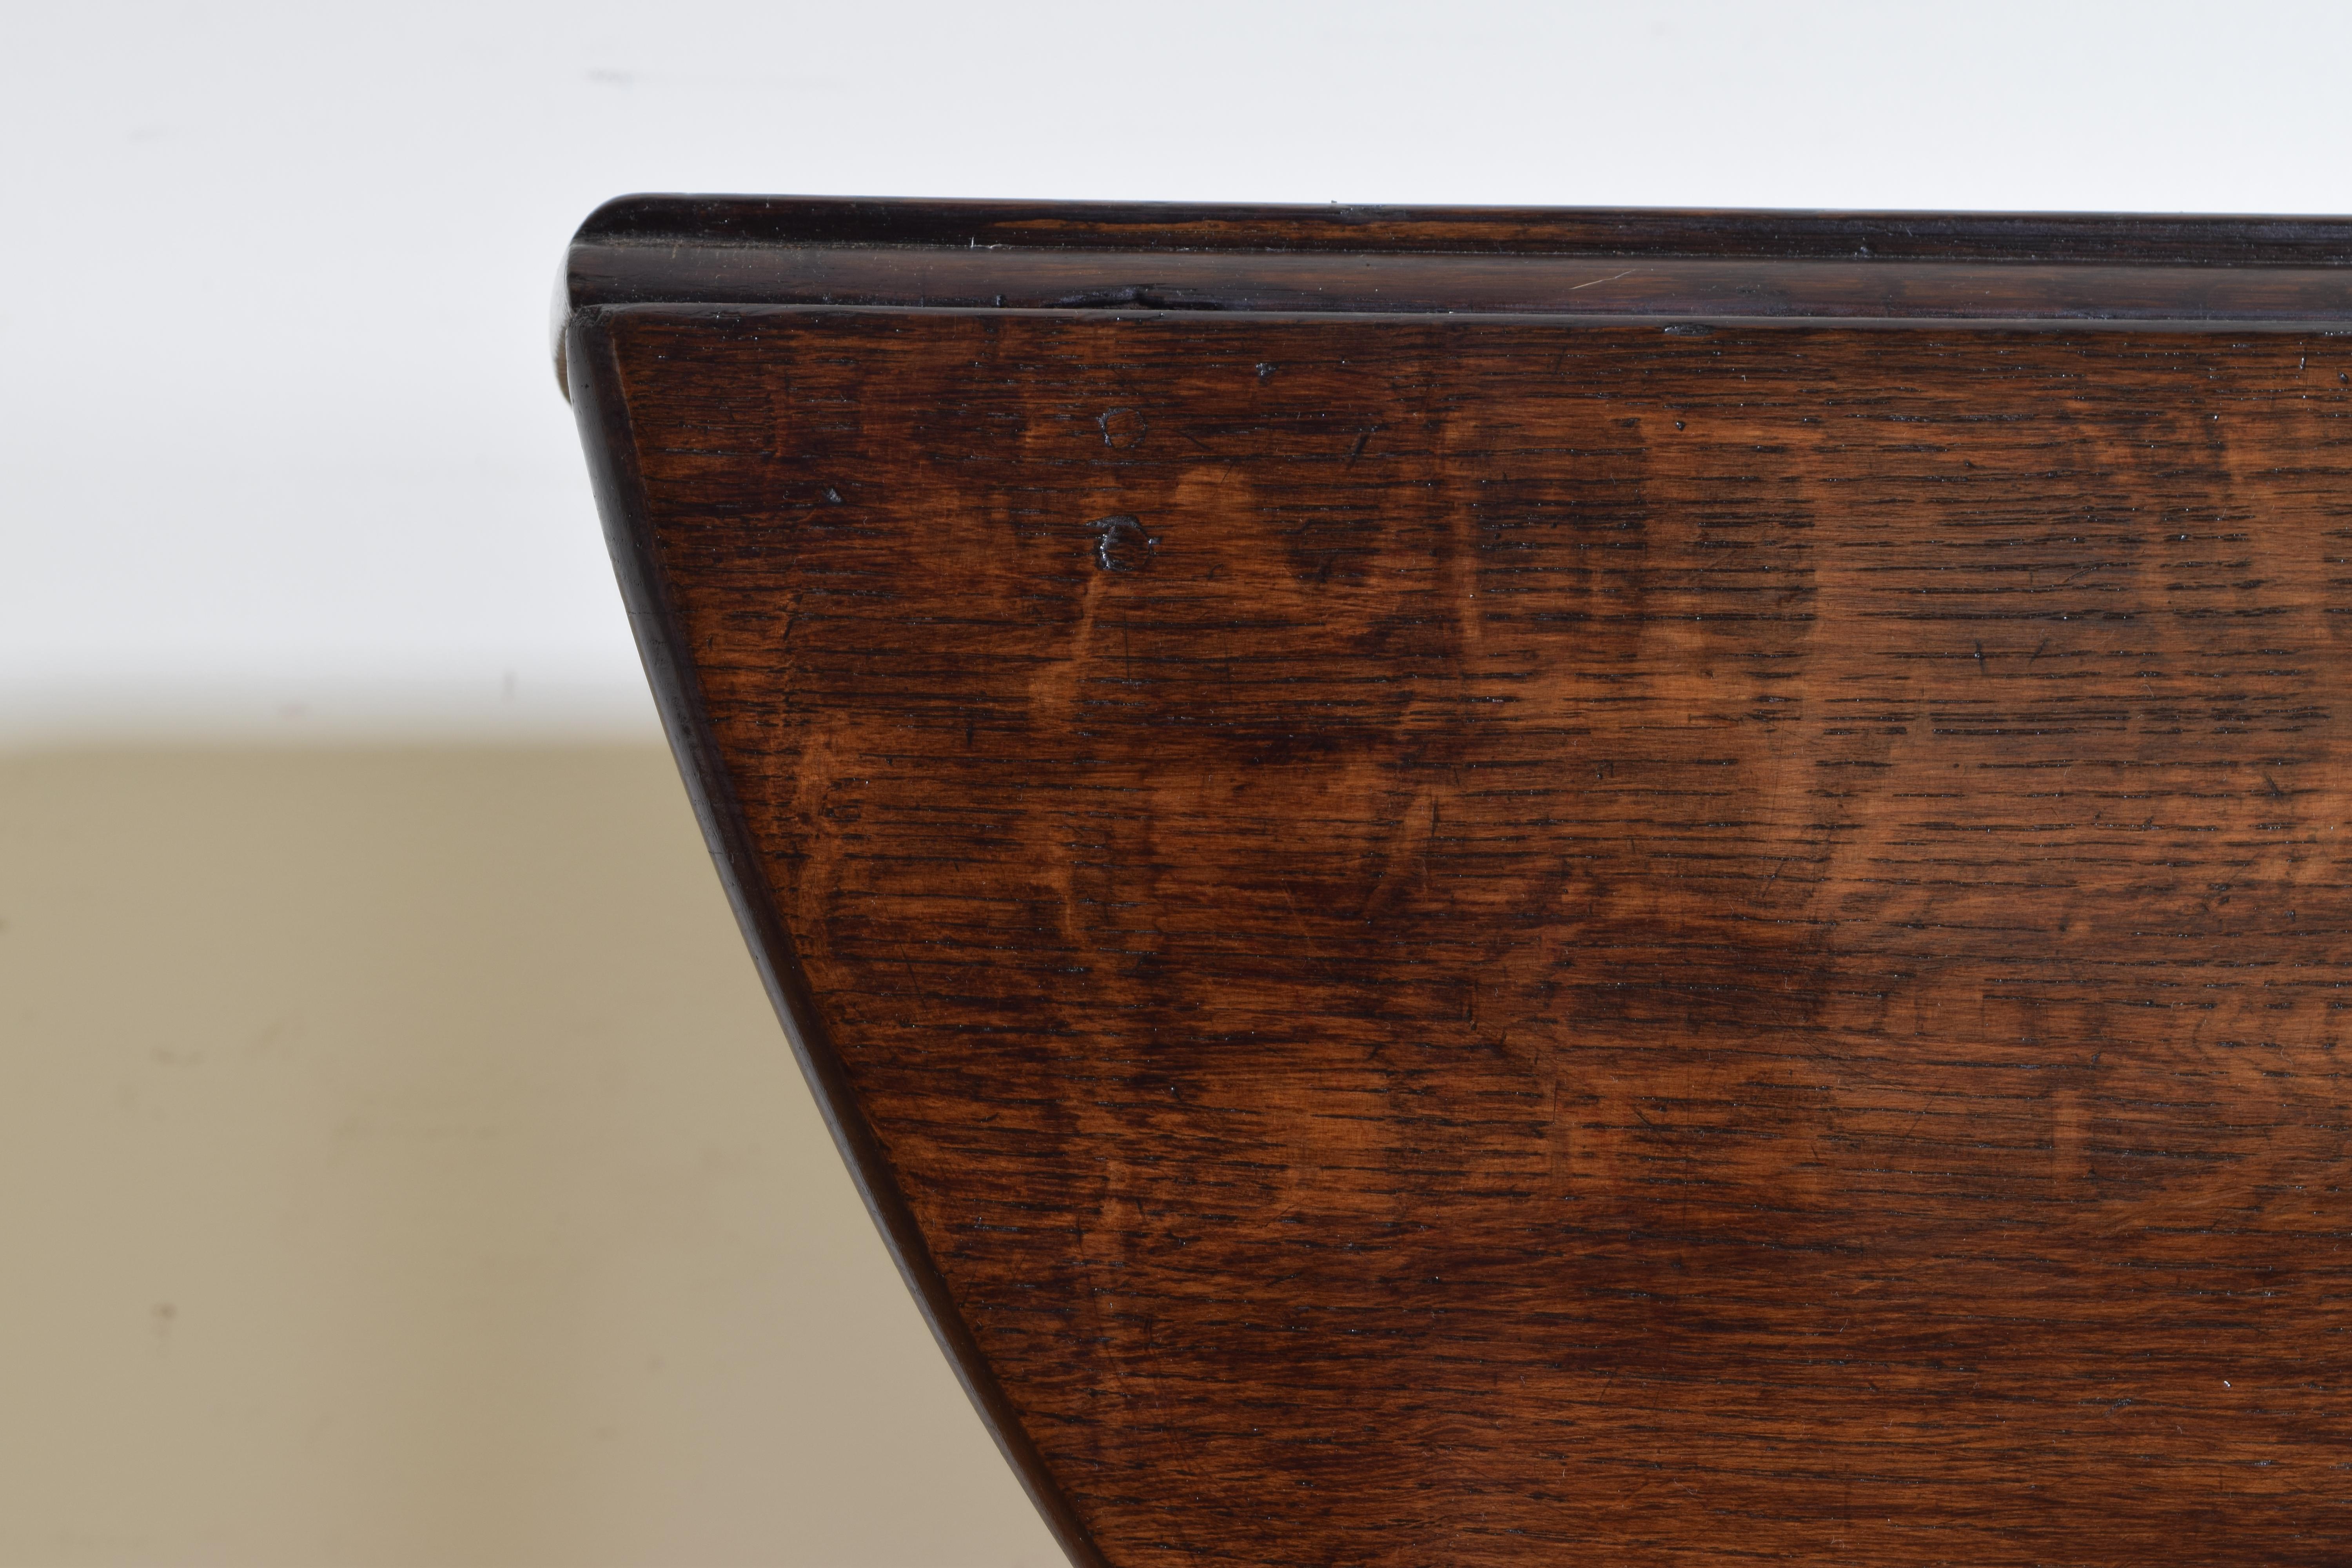 English Queen Anne Period Oak Drop-Leaf Table, First Quarter of the 18th Century 5